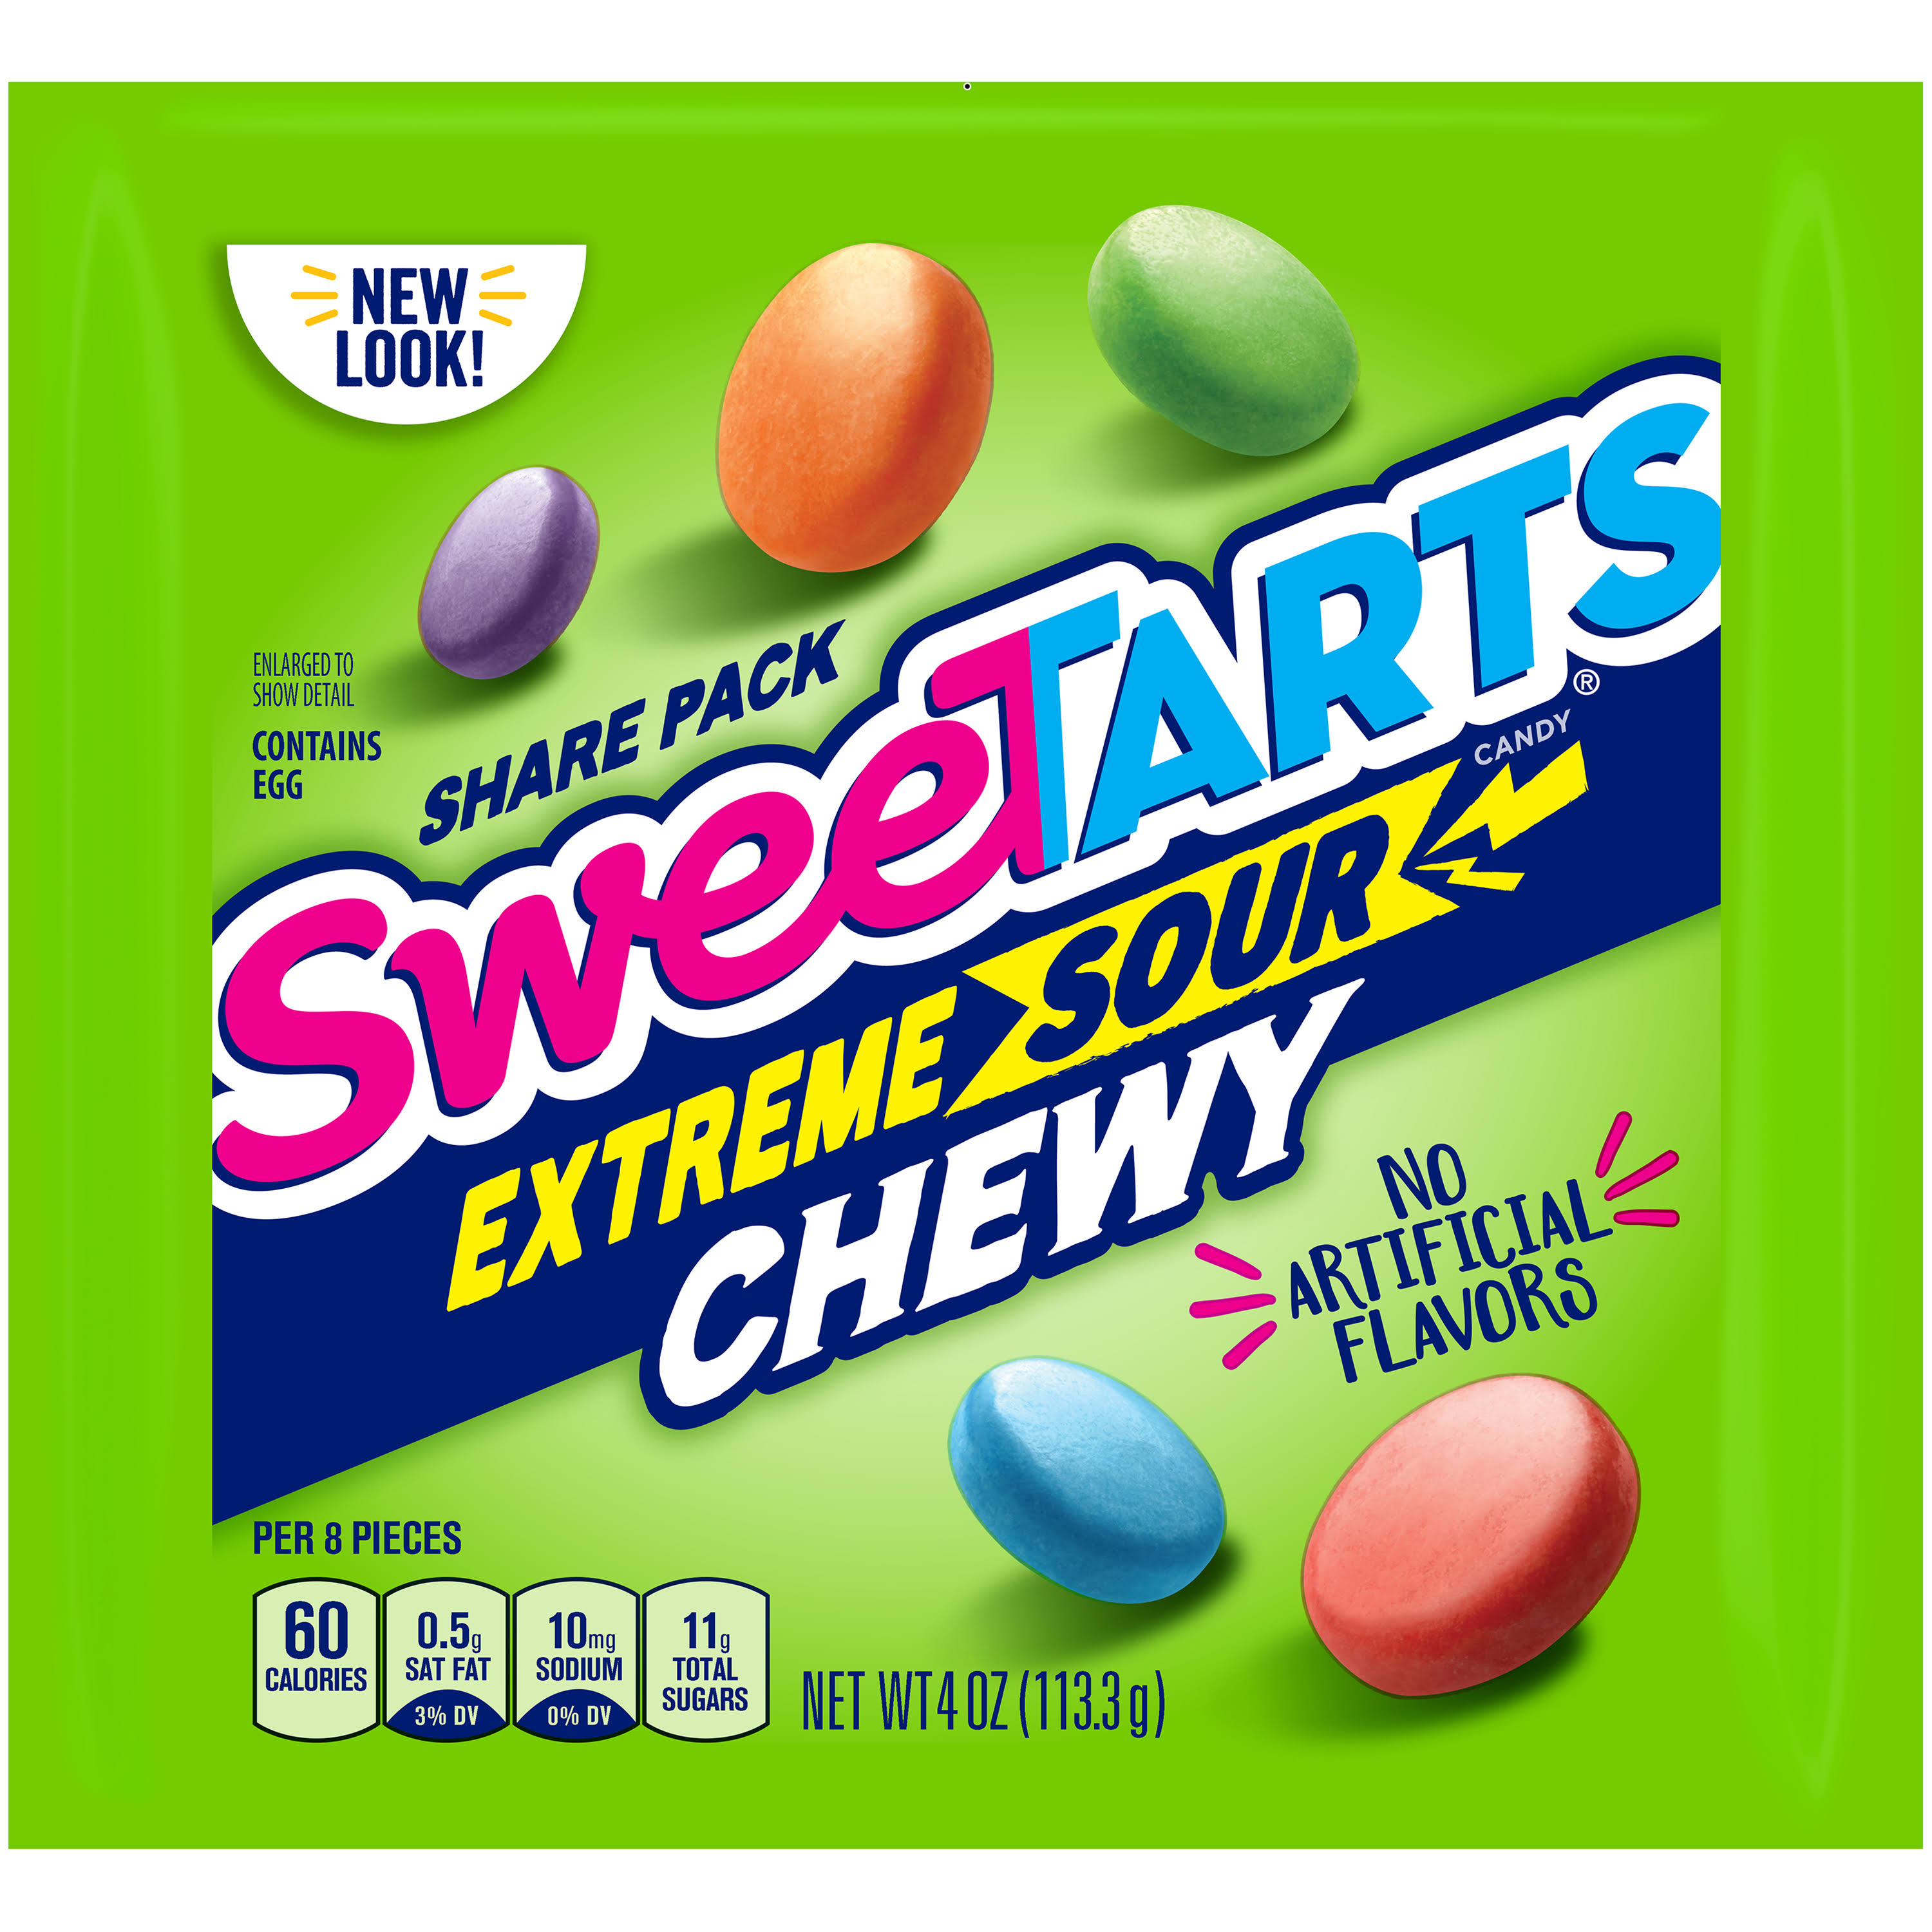 SWEETARTS Chewy Sours 4 oz. Pouch